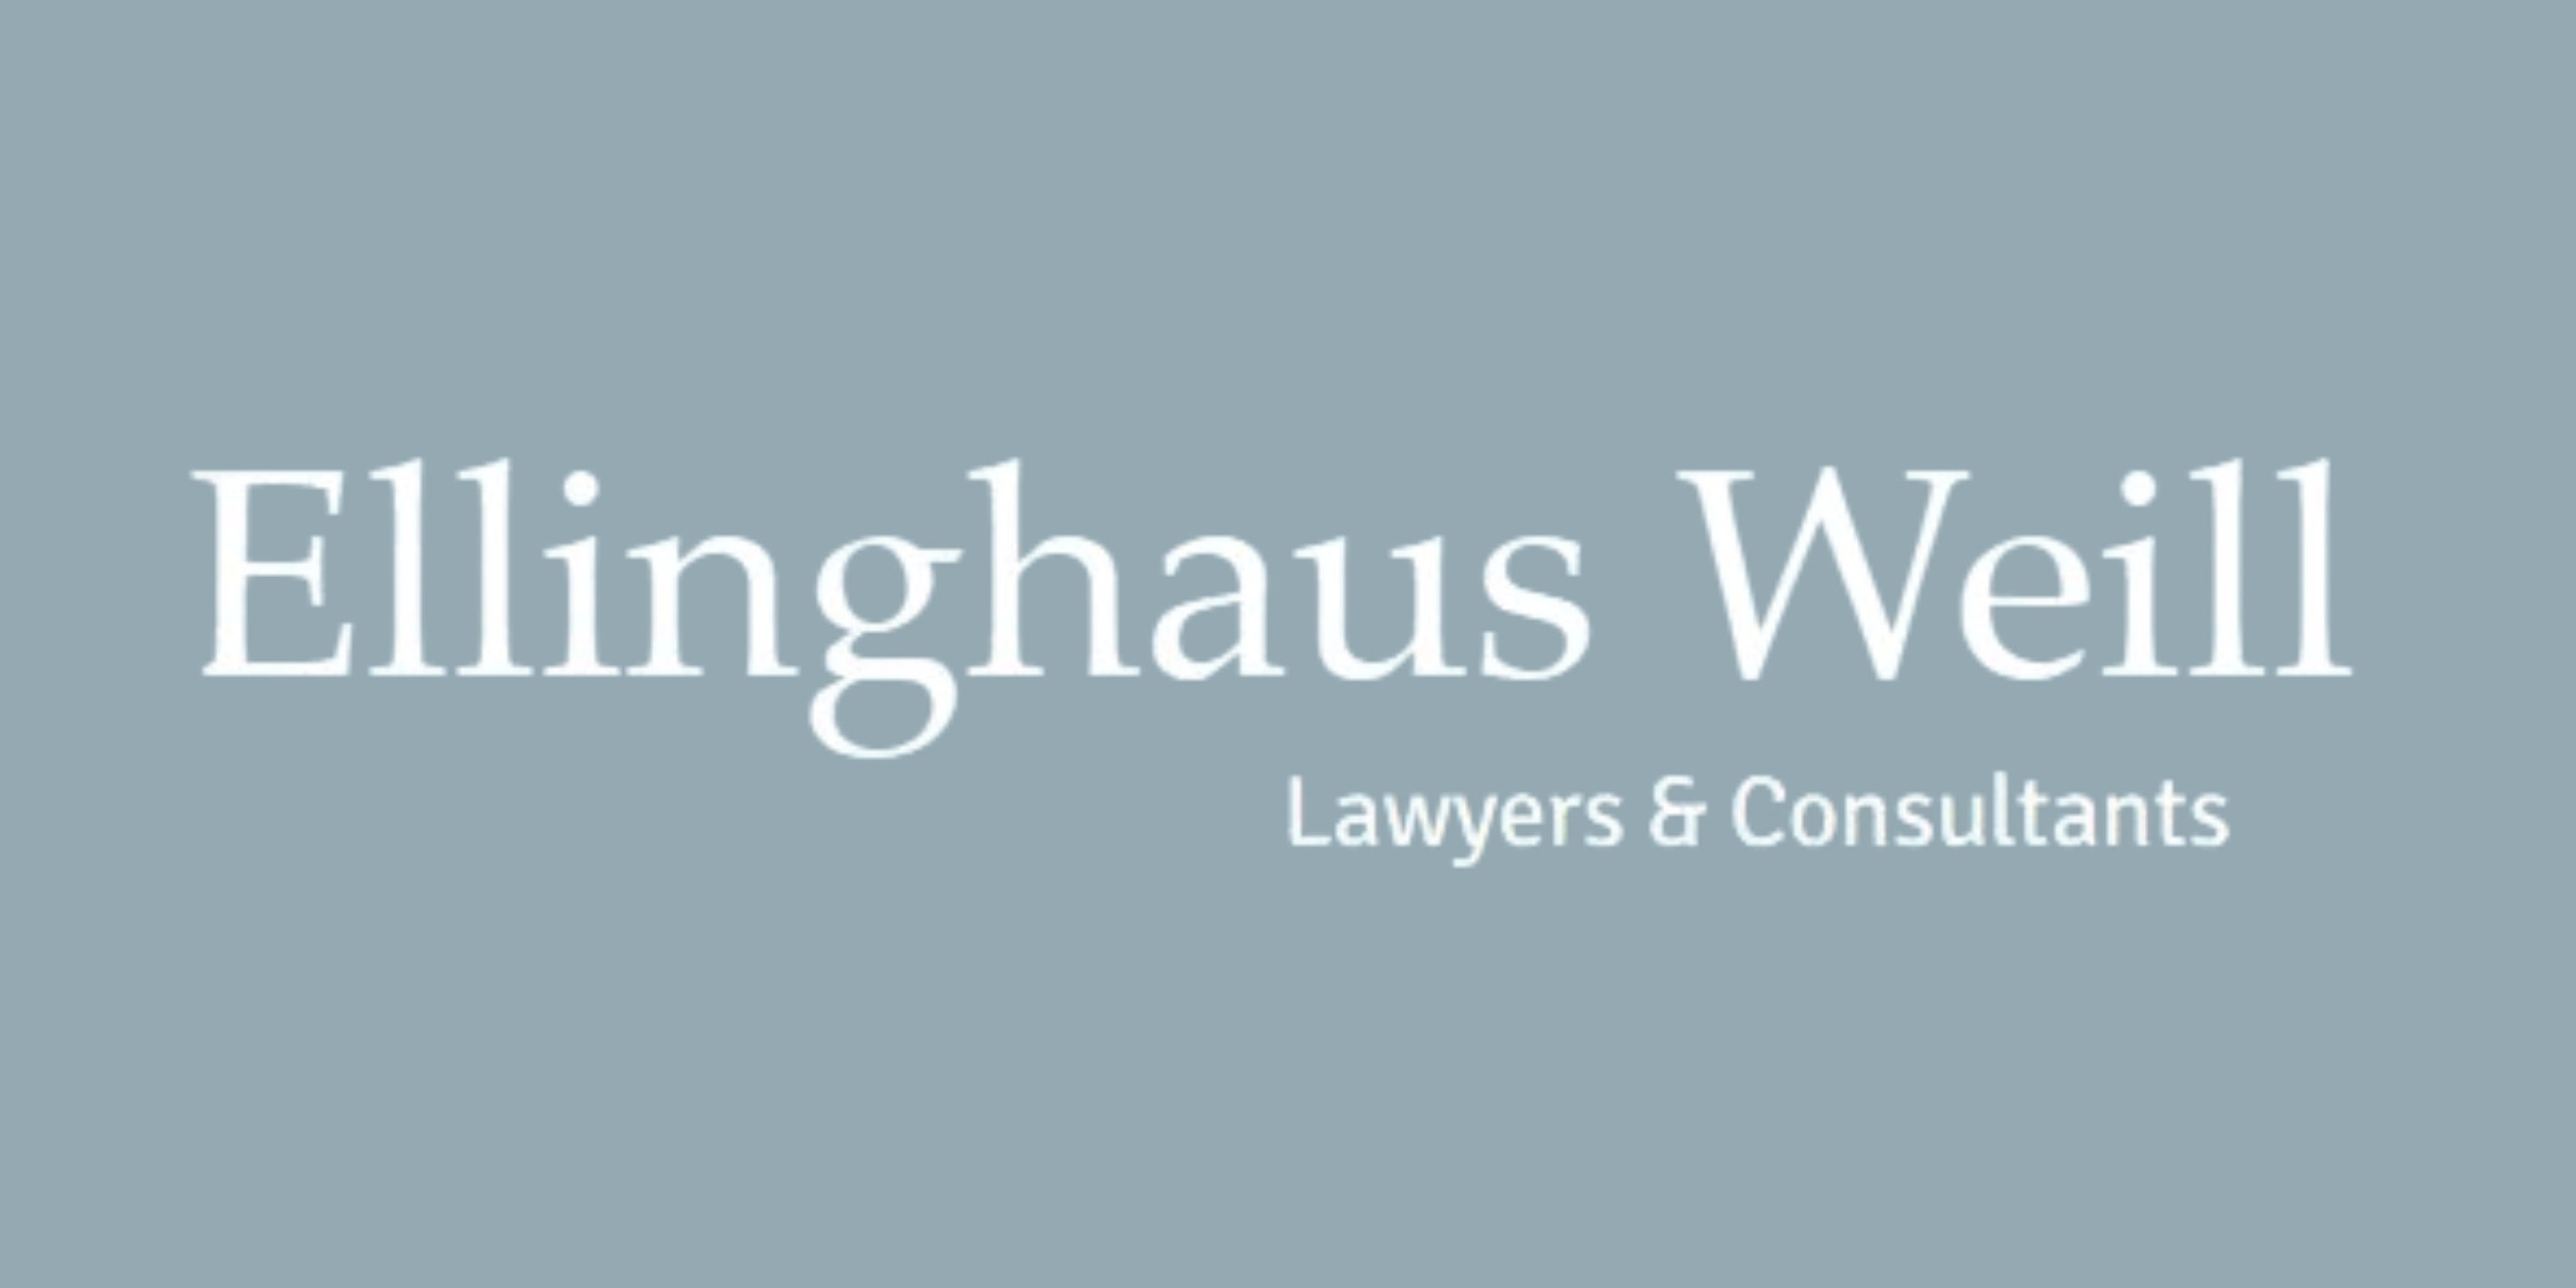 Ellinghaus Weill Lawyers & Consultants